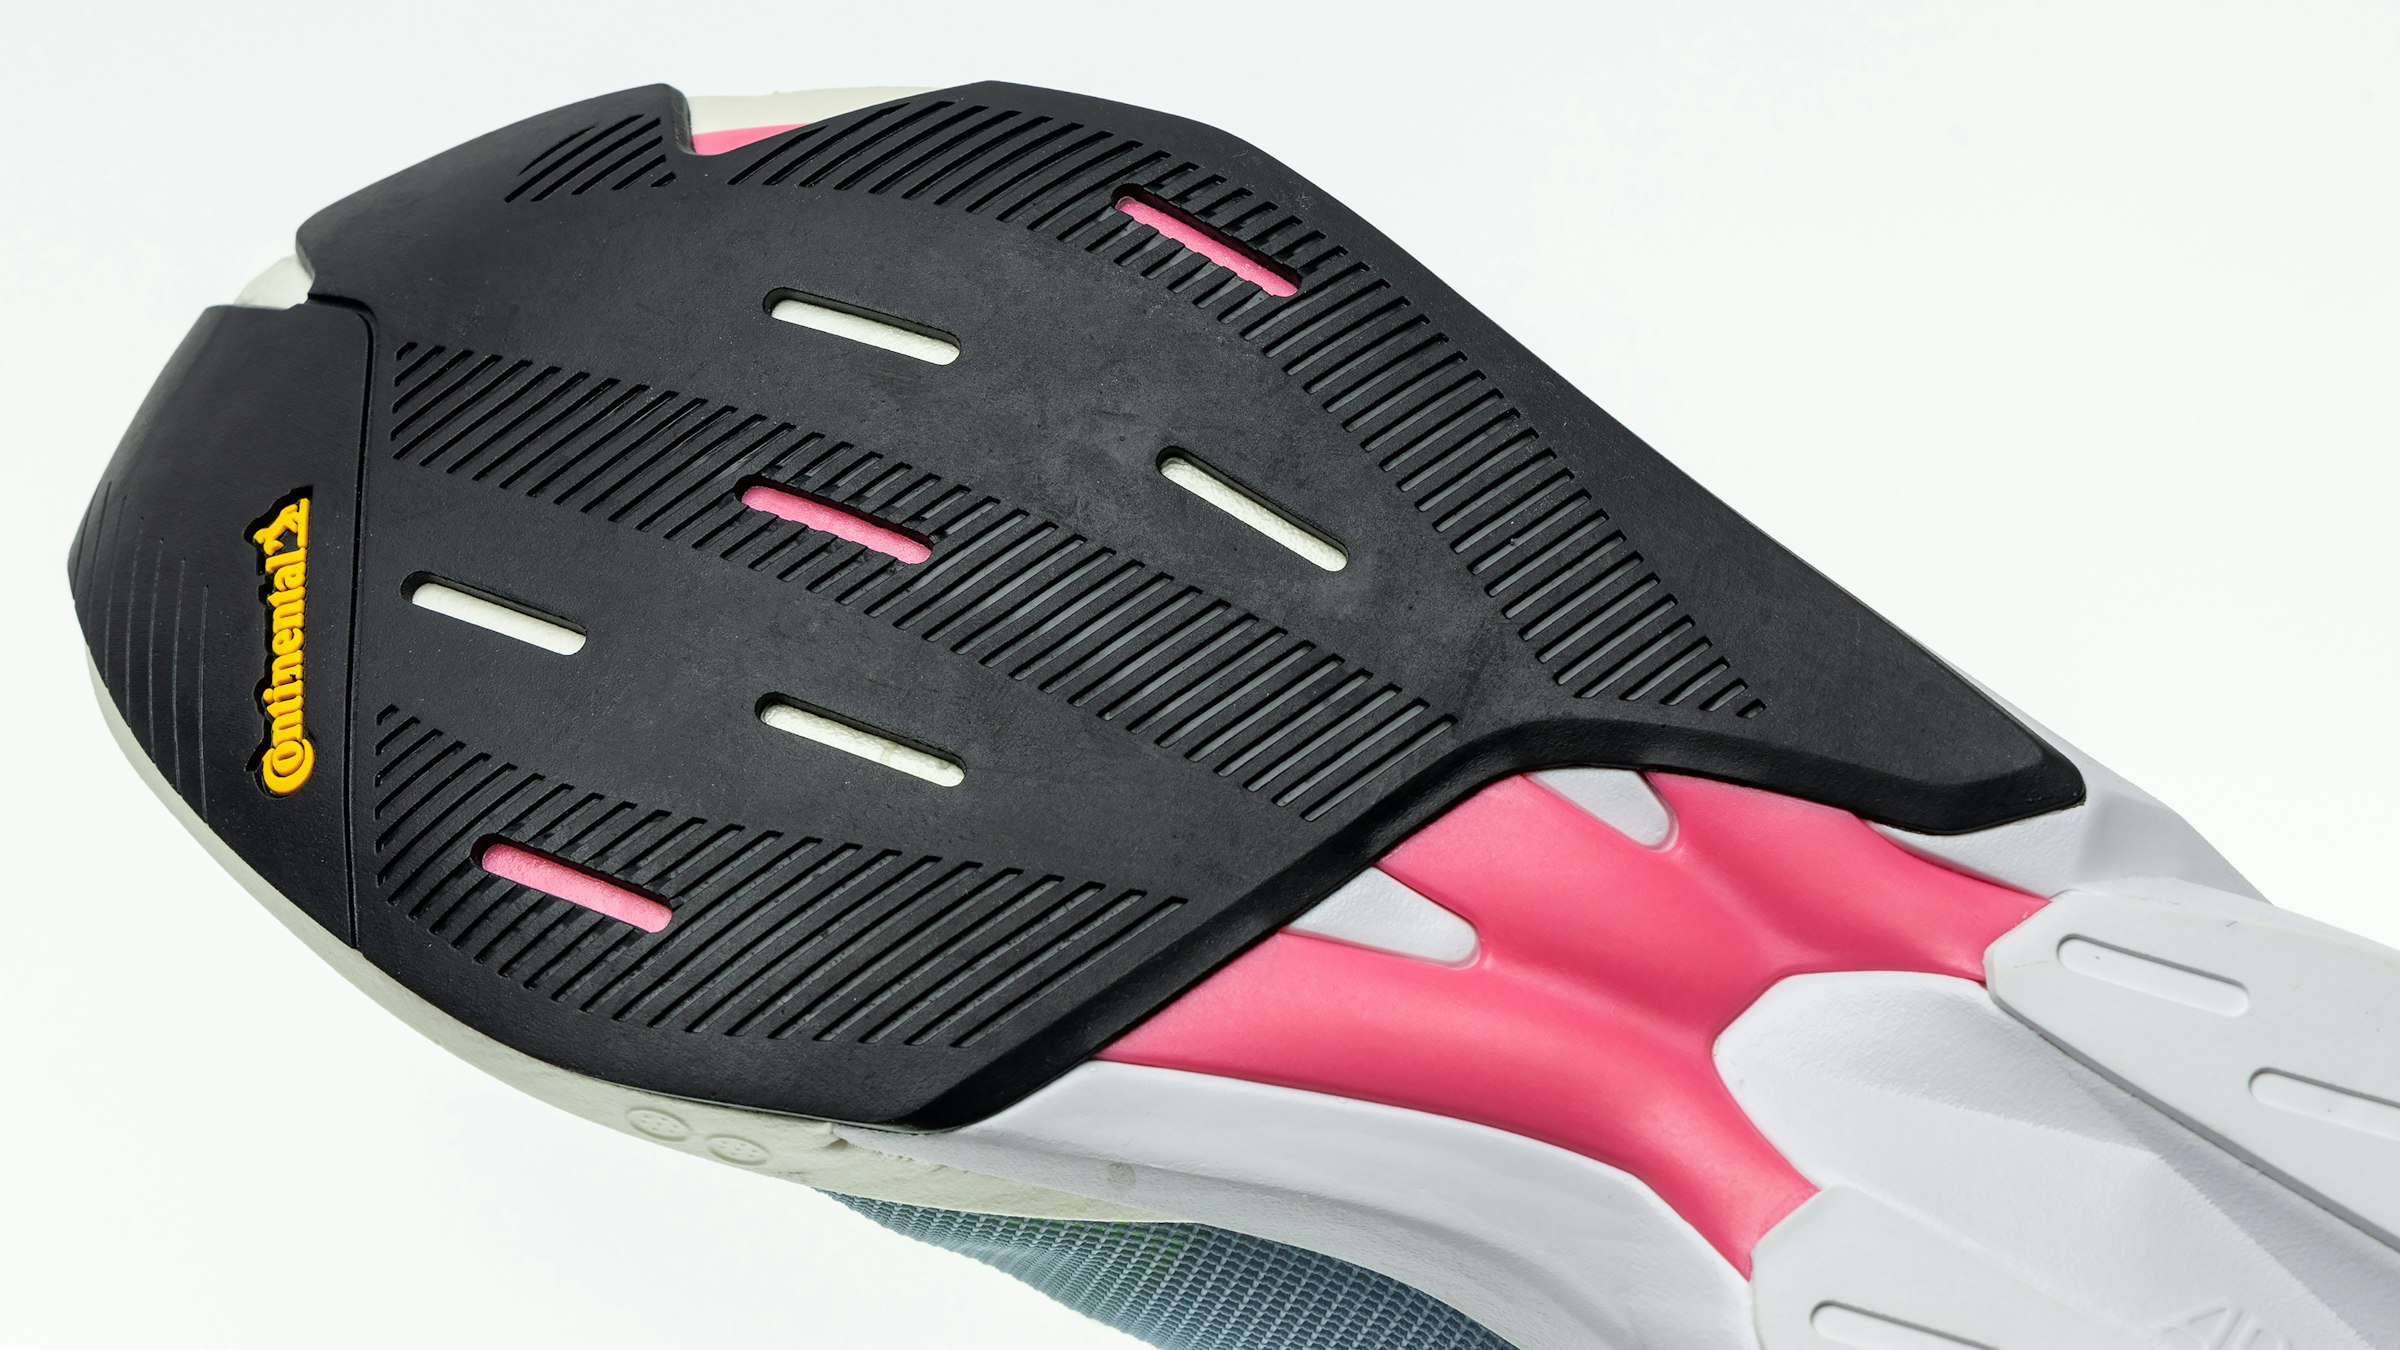 Continental rubber used in the outsole. The pink part represents TORSION ROD 2.0